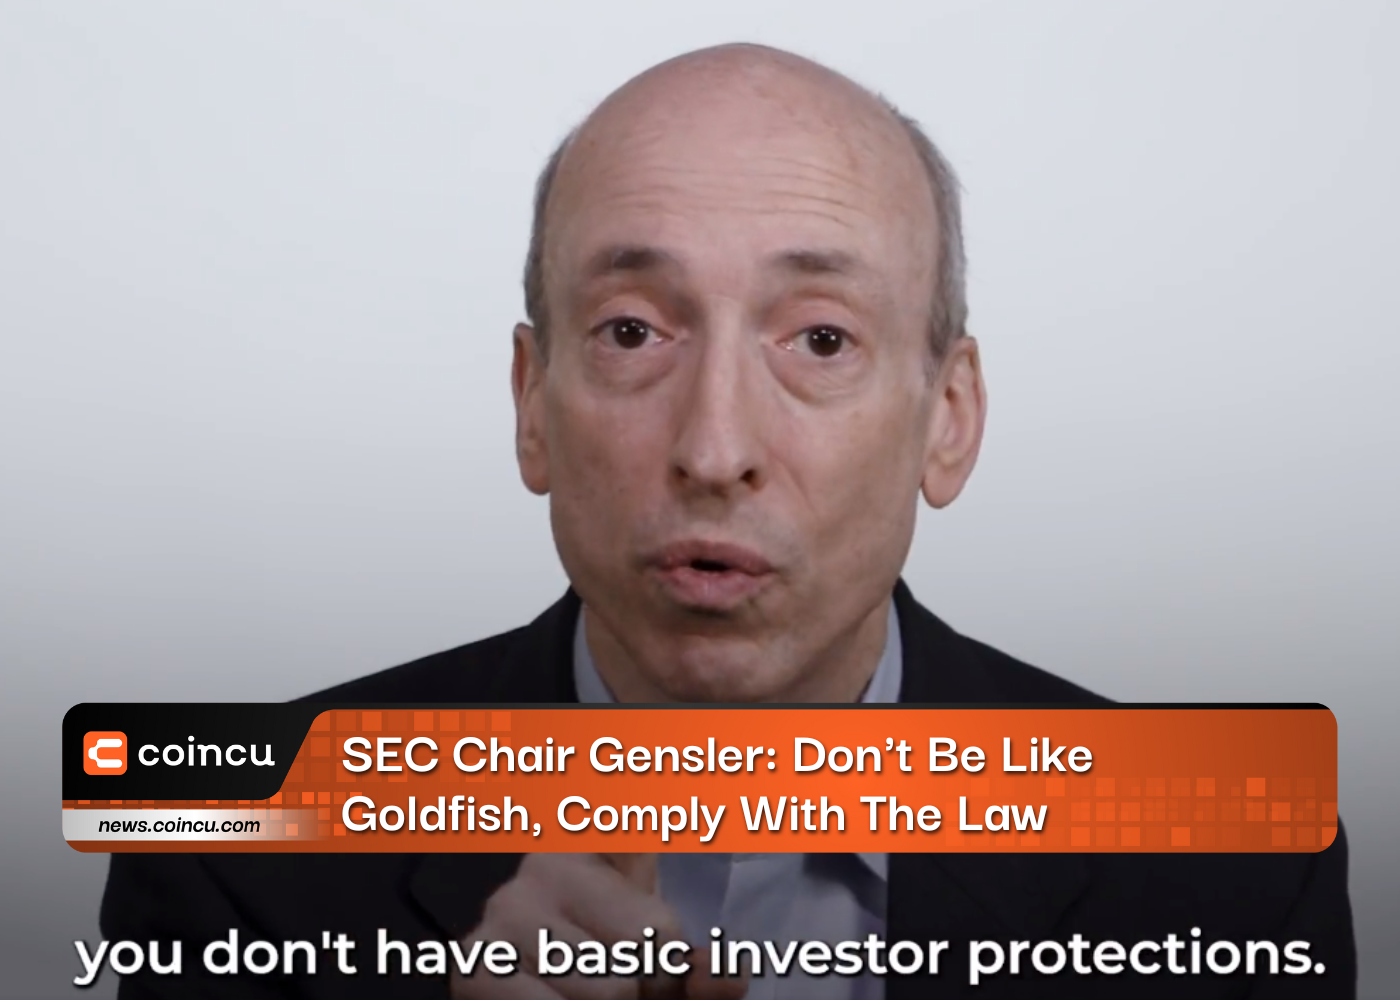 SEC Chair Gensler: Don't Be Like Goldfish, Comply With The Law